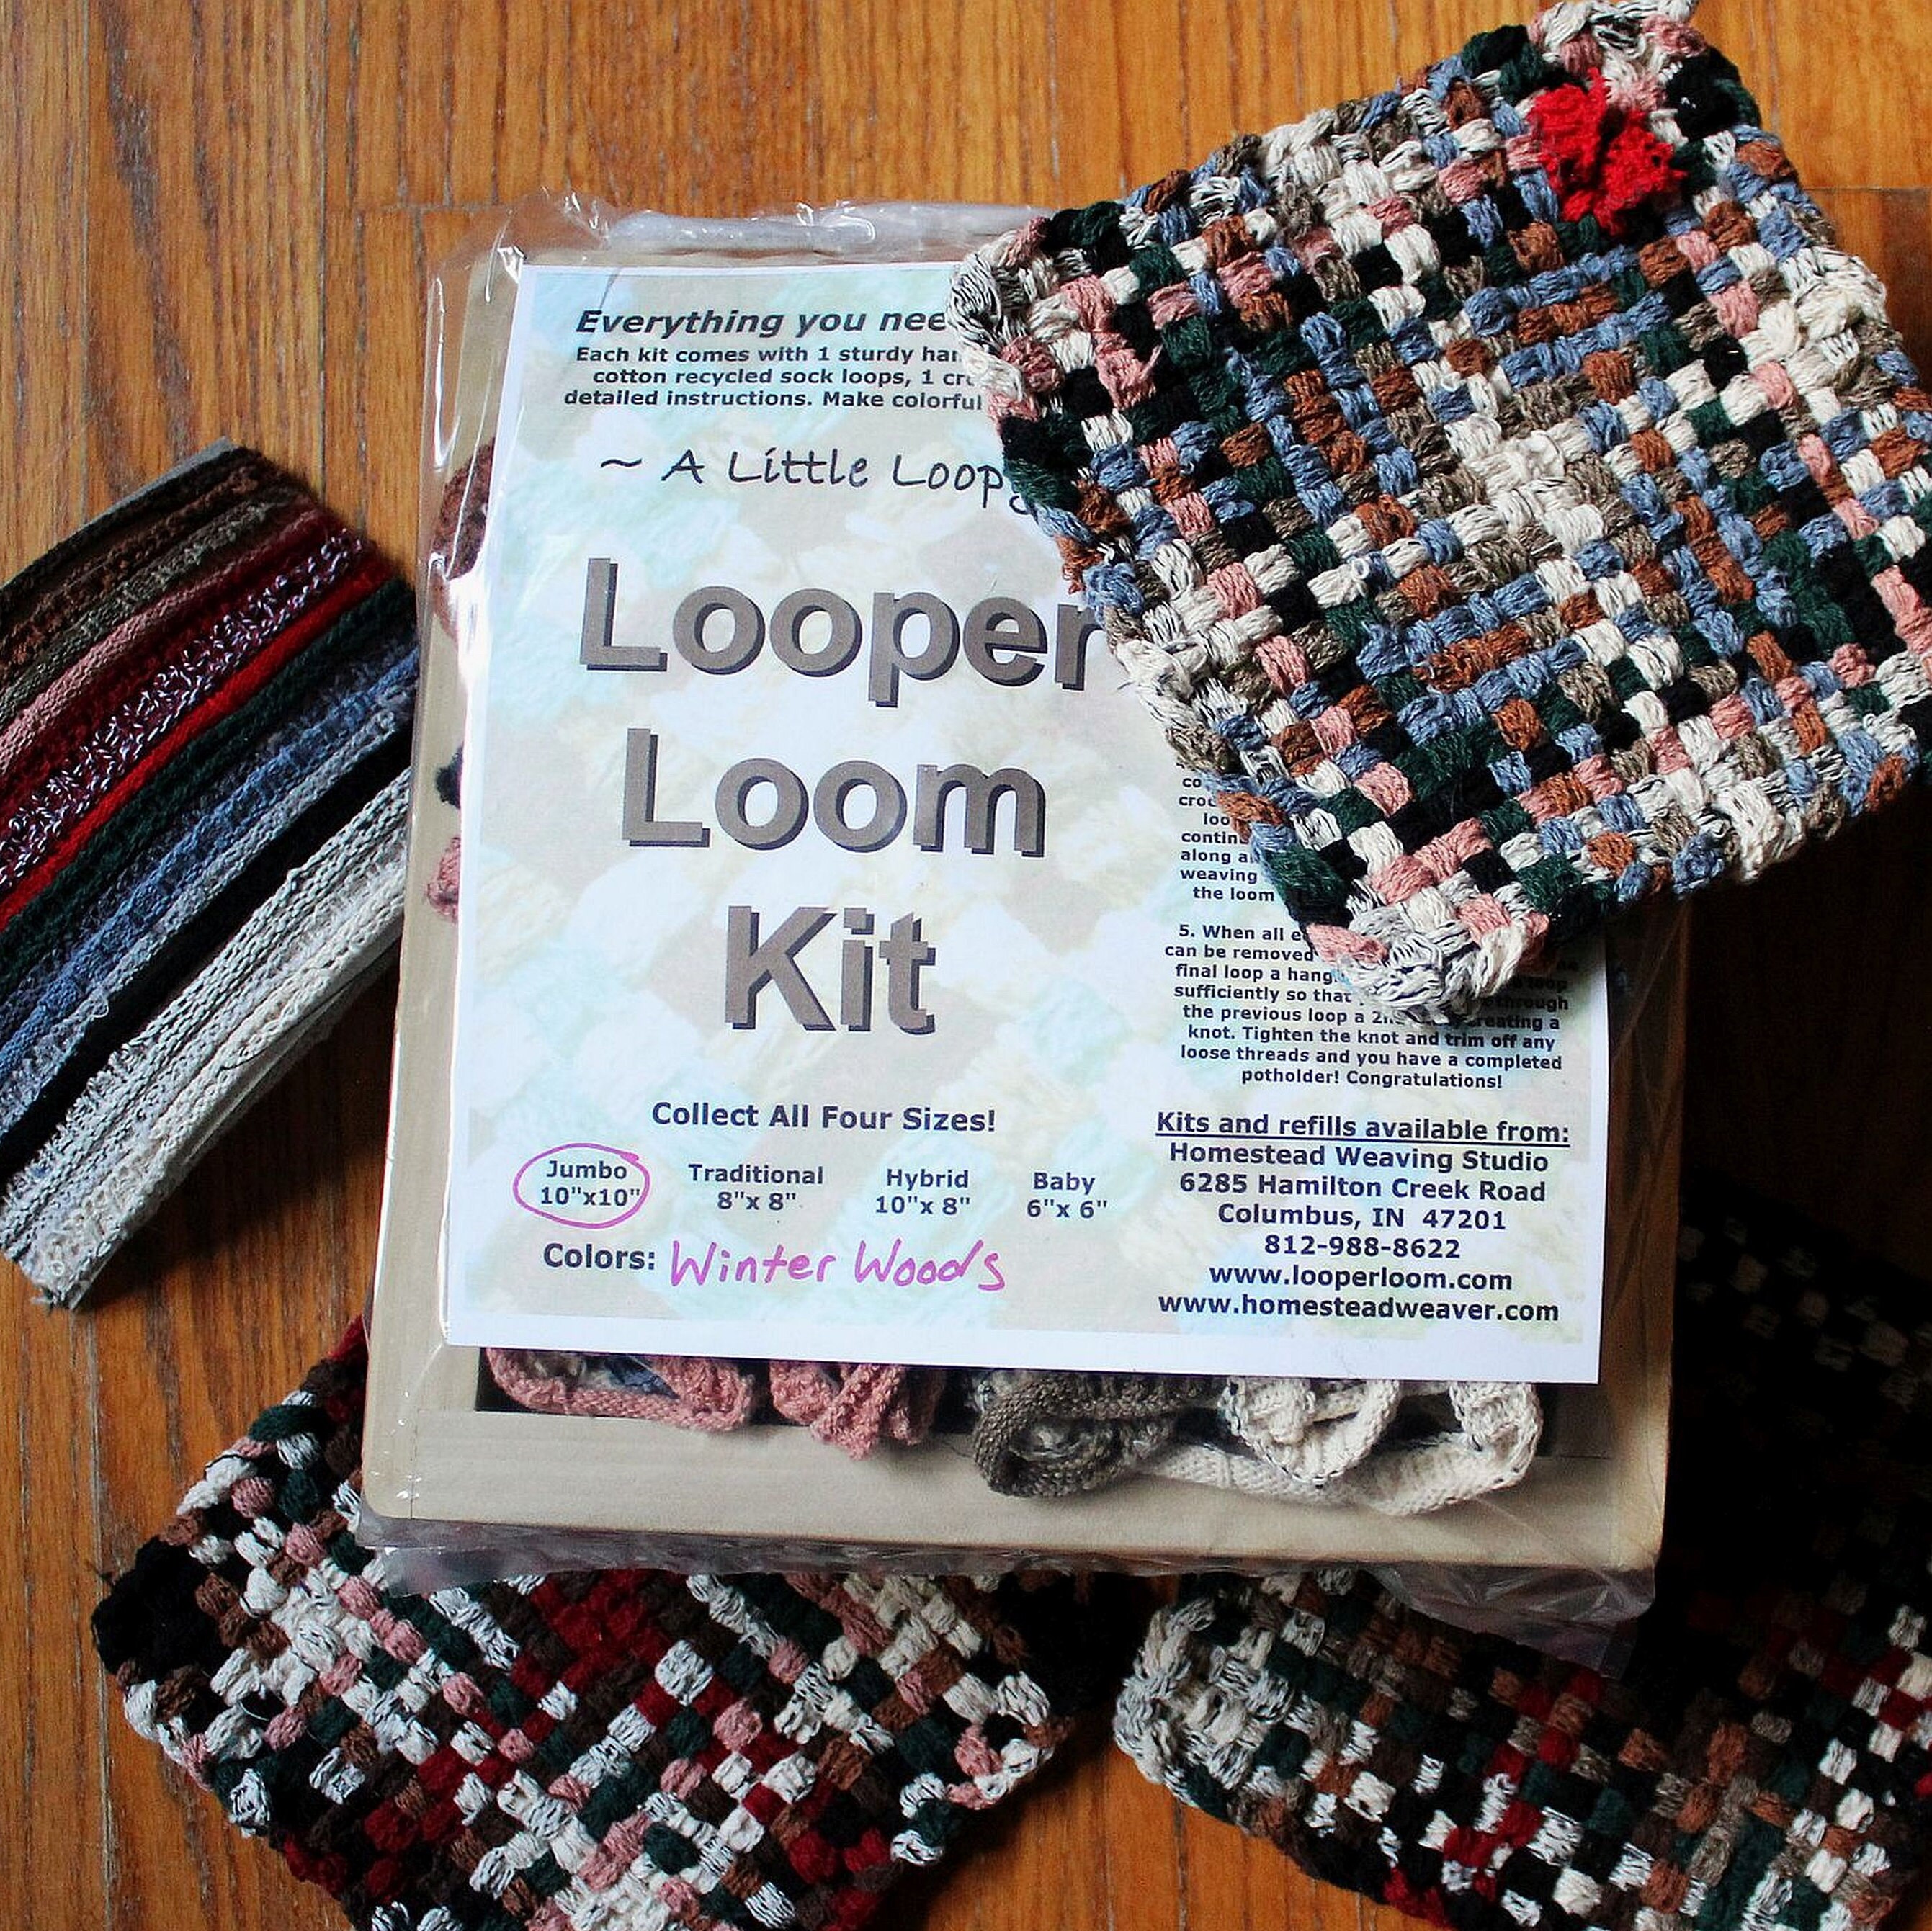 Extra Pound of Weaving Loops